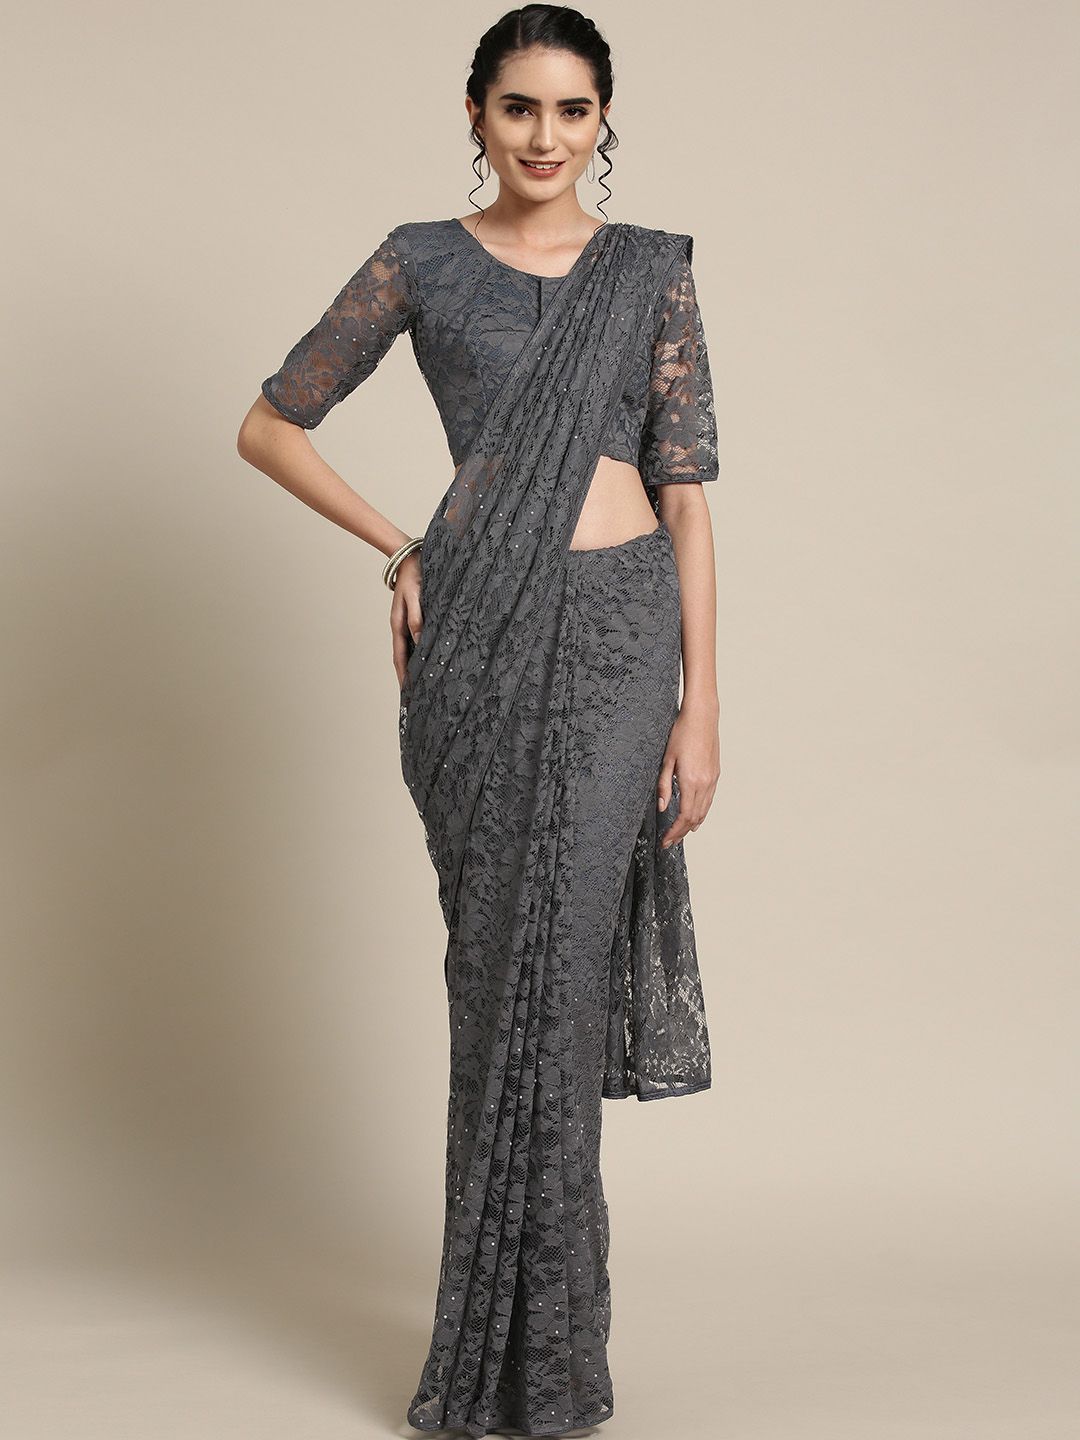 Saree mall Charcoal Grey Embelished Detail Lace Saree Price in India